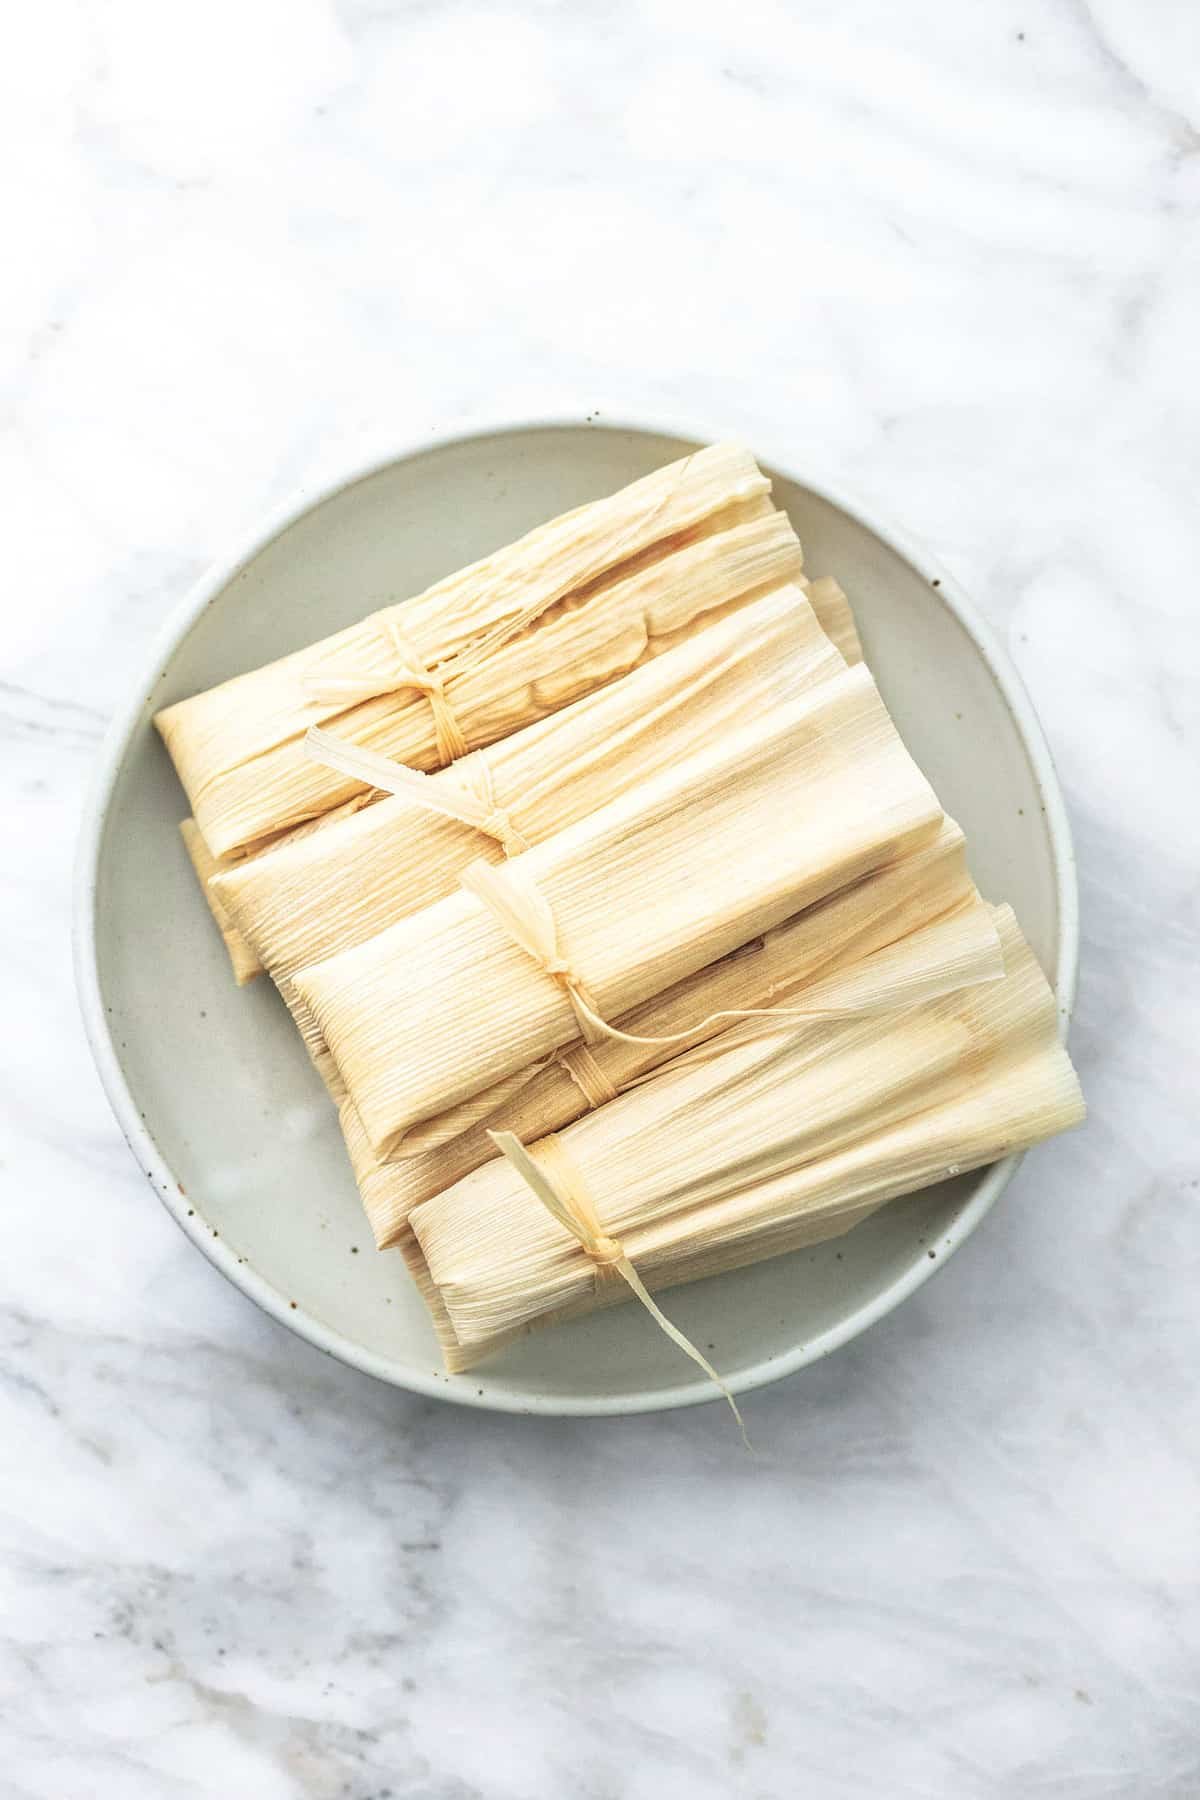 top view of wrapped tamales on a plate.